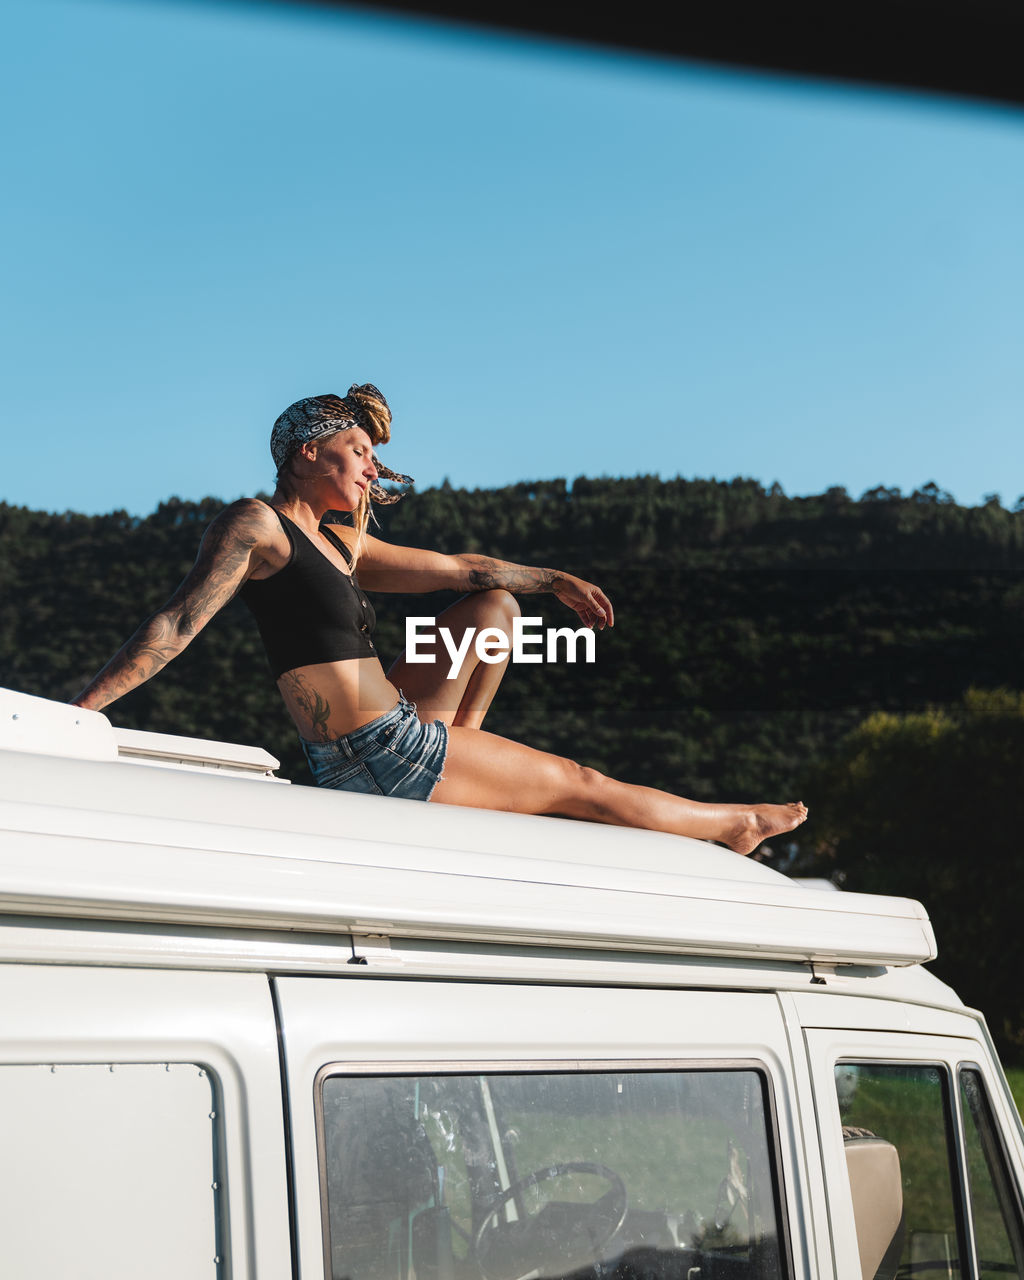 Full body side view of of pleasant barefoot thoughtful hippie female traveler sitting with eyes closed on roof of white camping van parked in nature during road trip